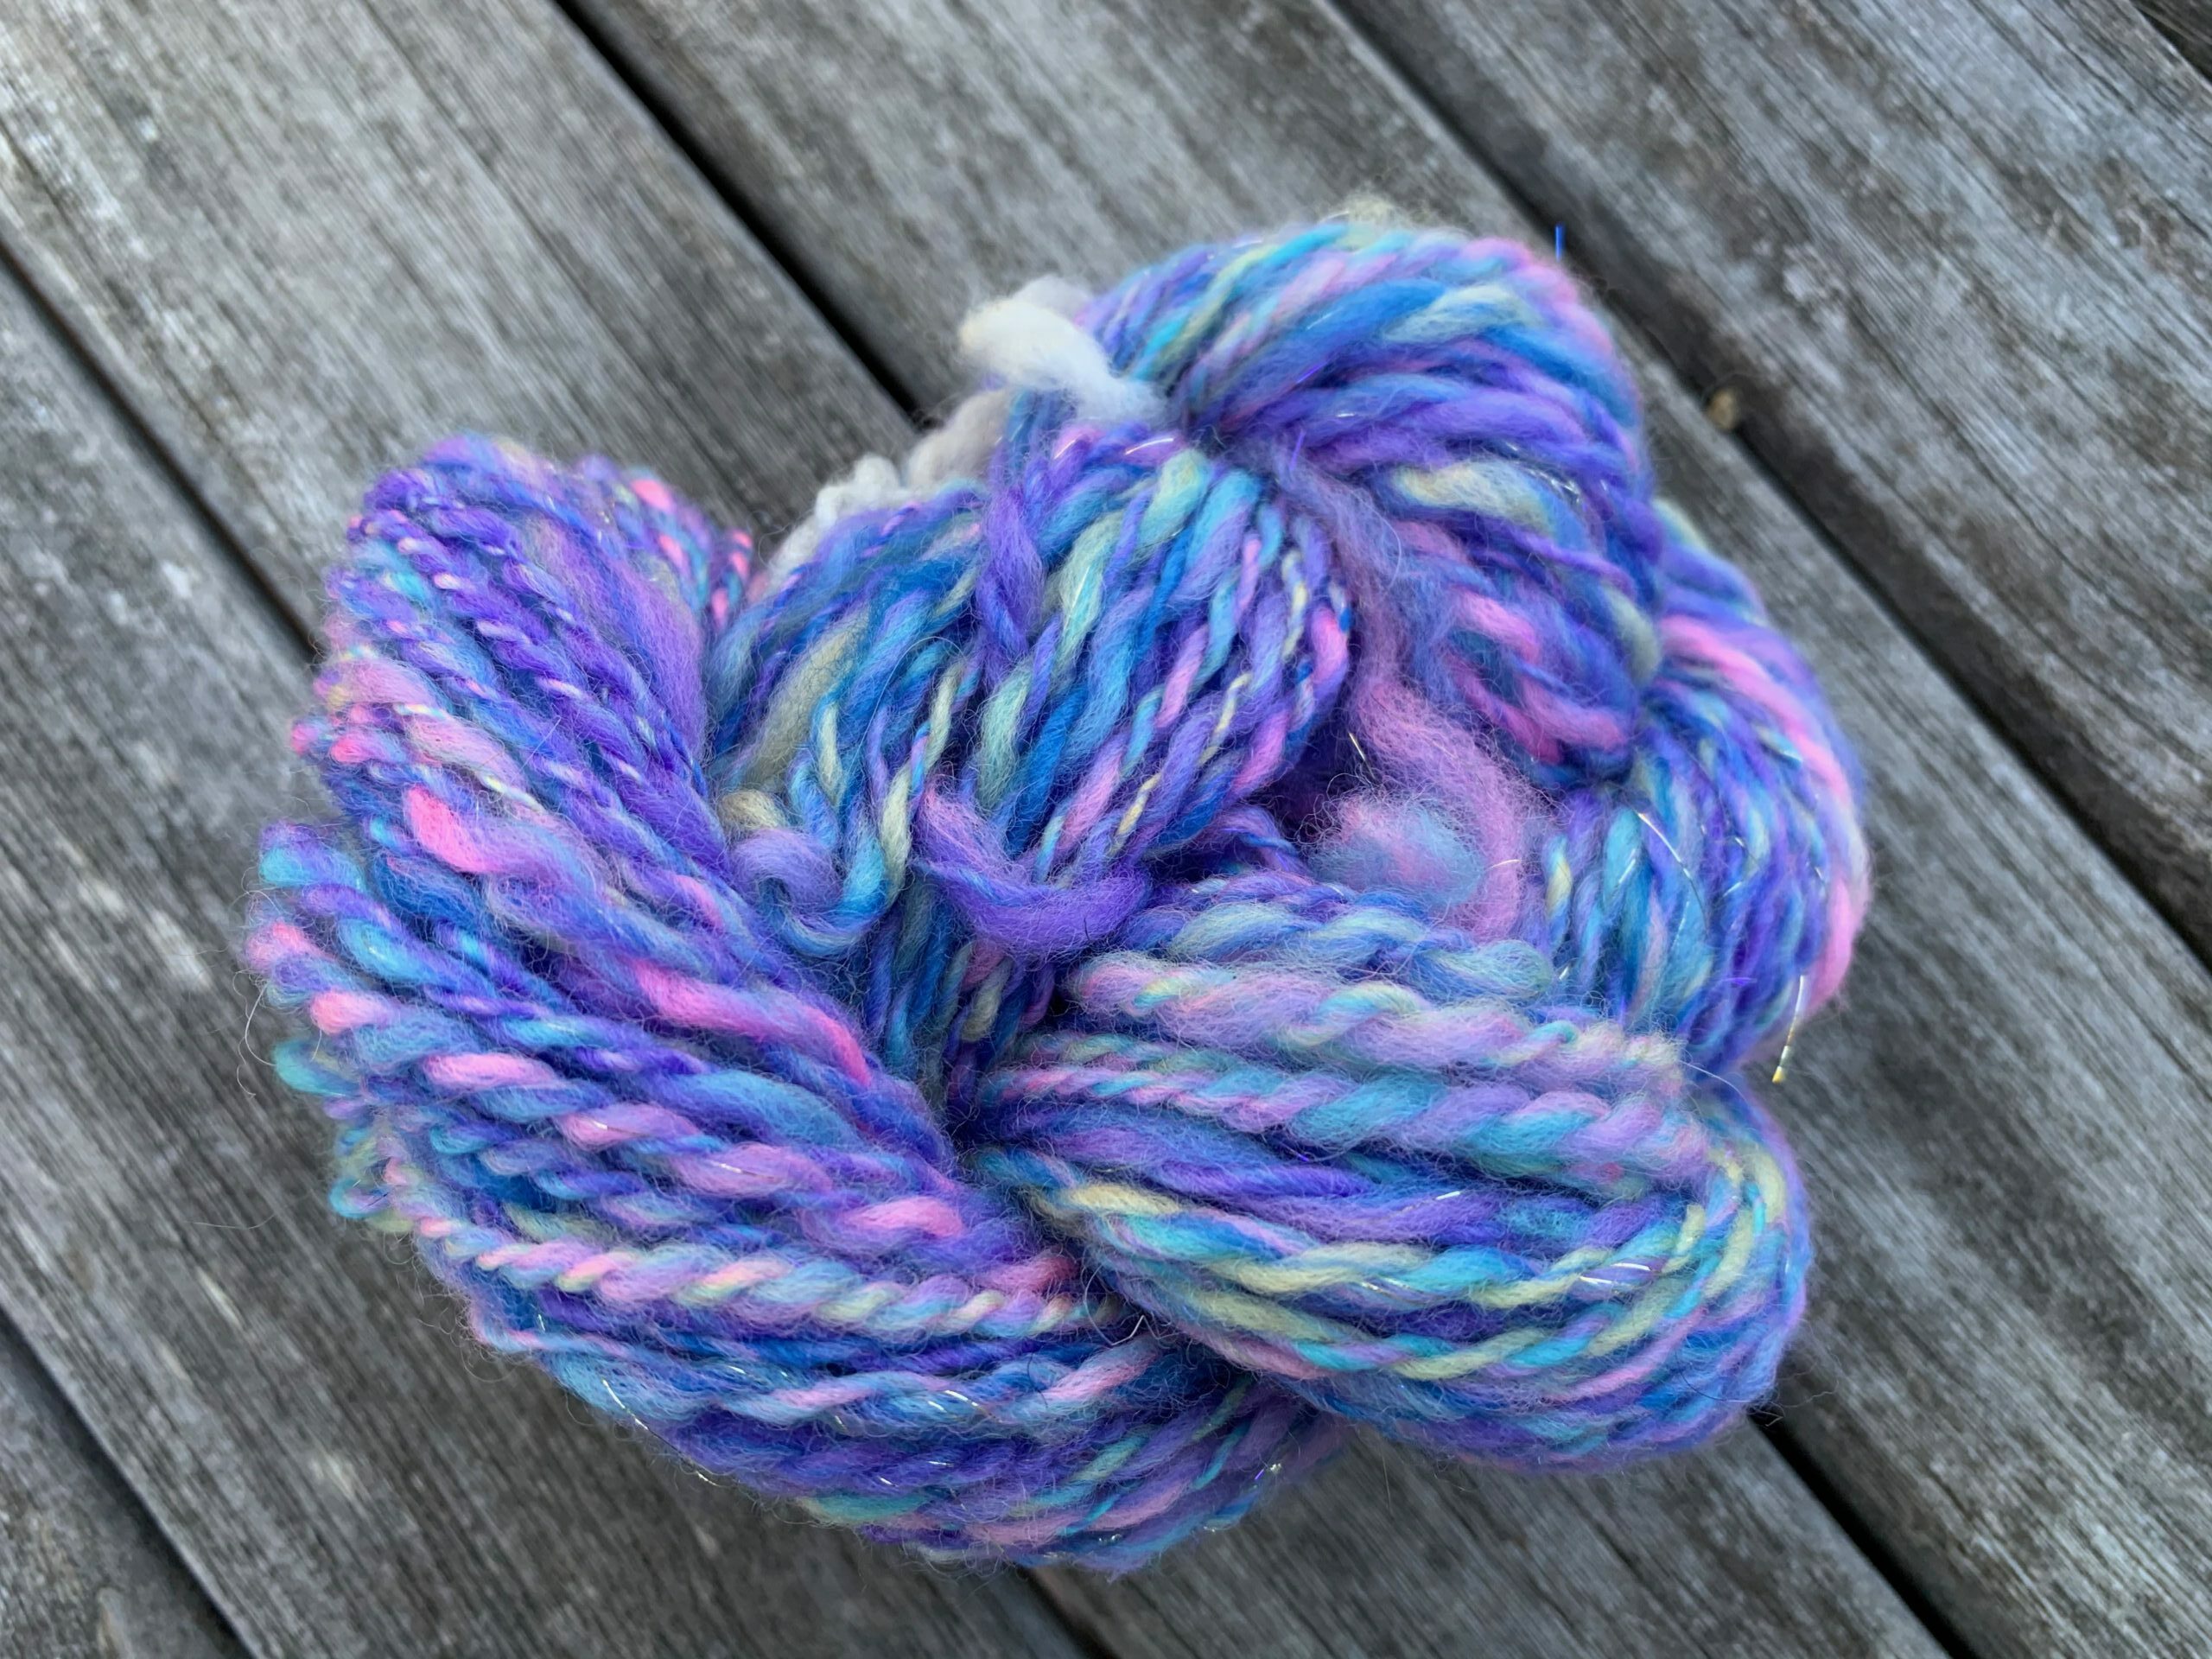 The same fiber, now all spun up and plied, then wound into a skein and twisted into something of a pretzel. It has all the same colors, and they make a barber-pole effect because each ply has many colors in it, and the two plies together usually bring different colors together.